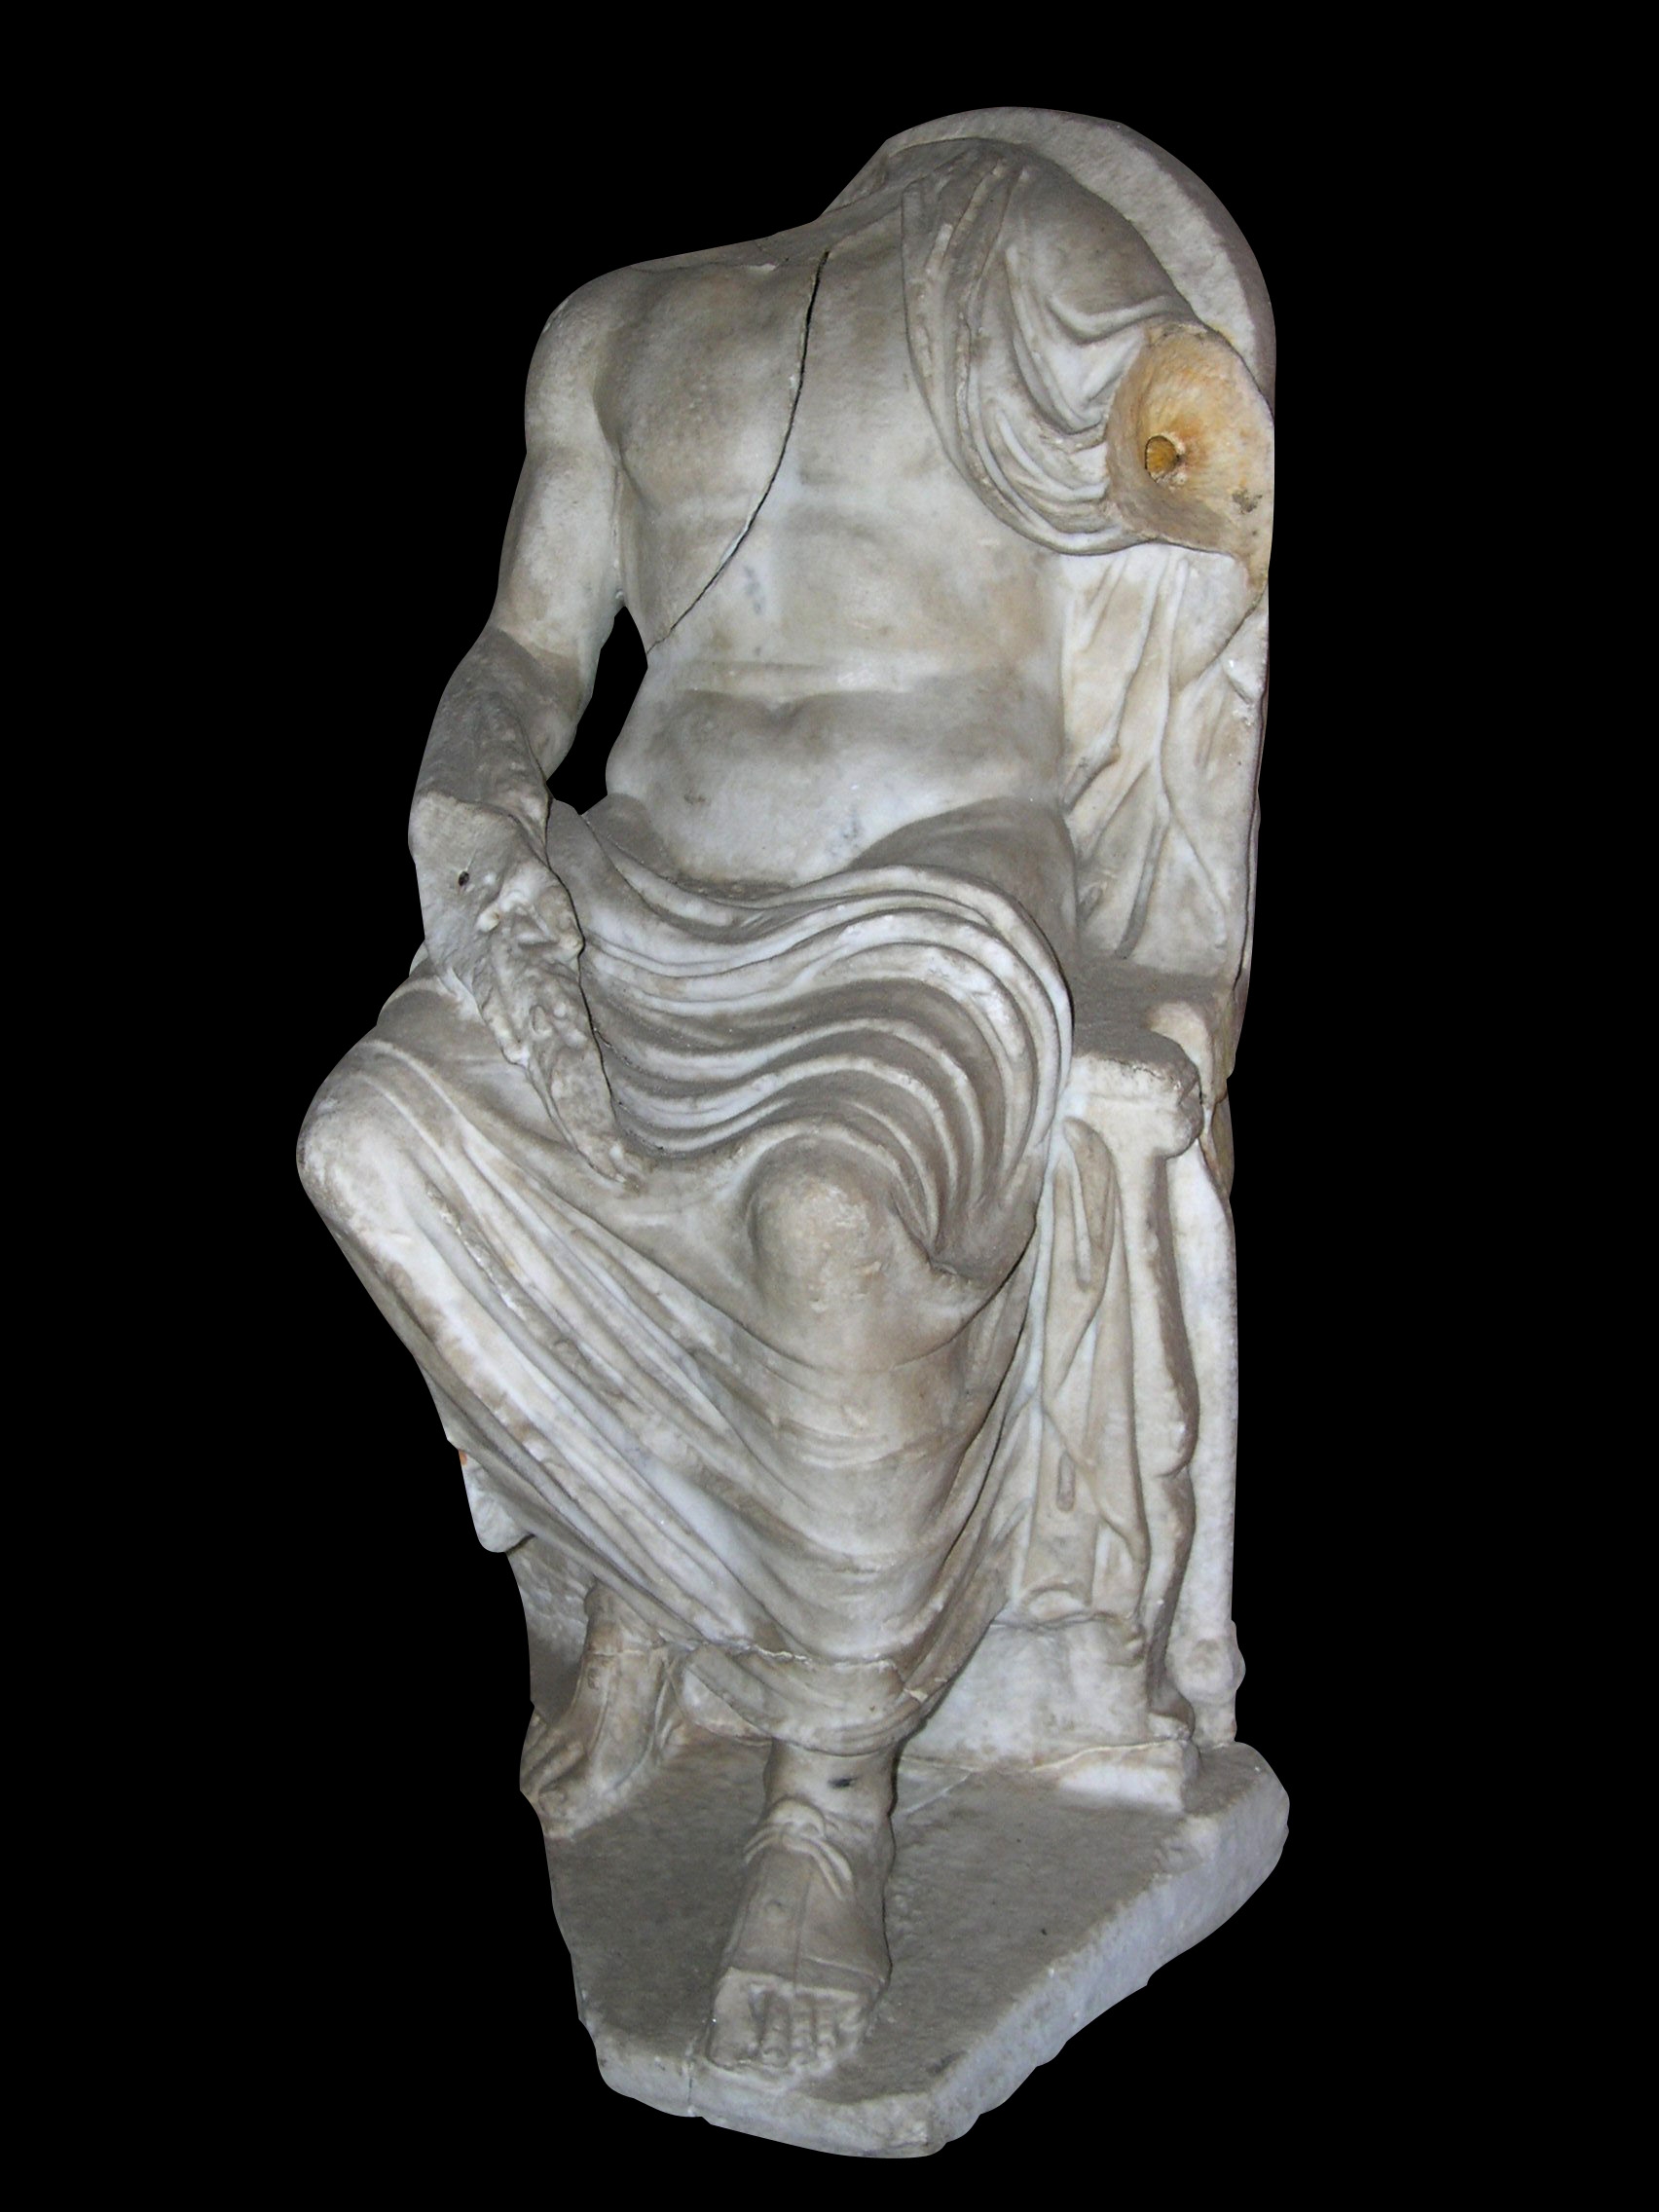 Headless statuette of seated Zeus